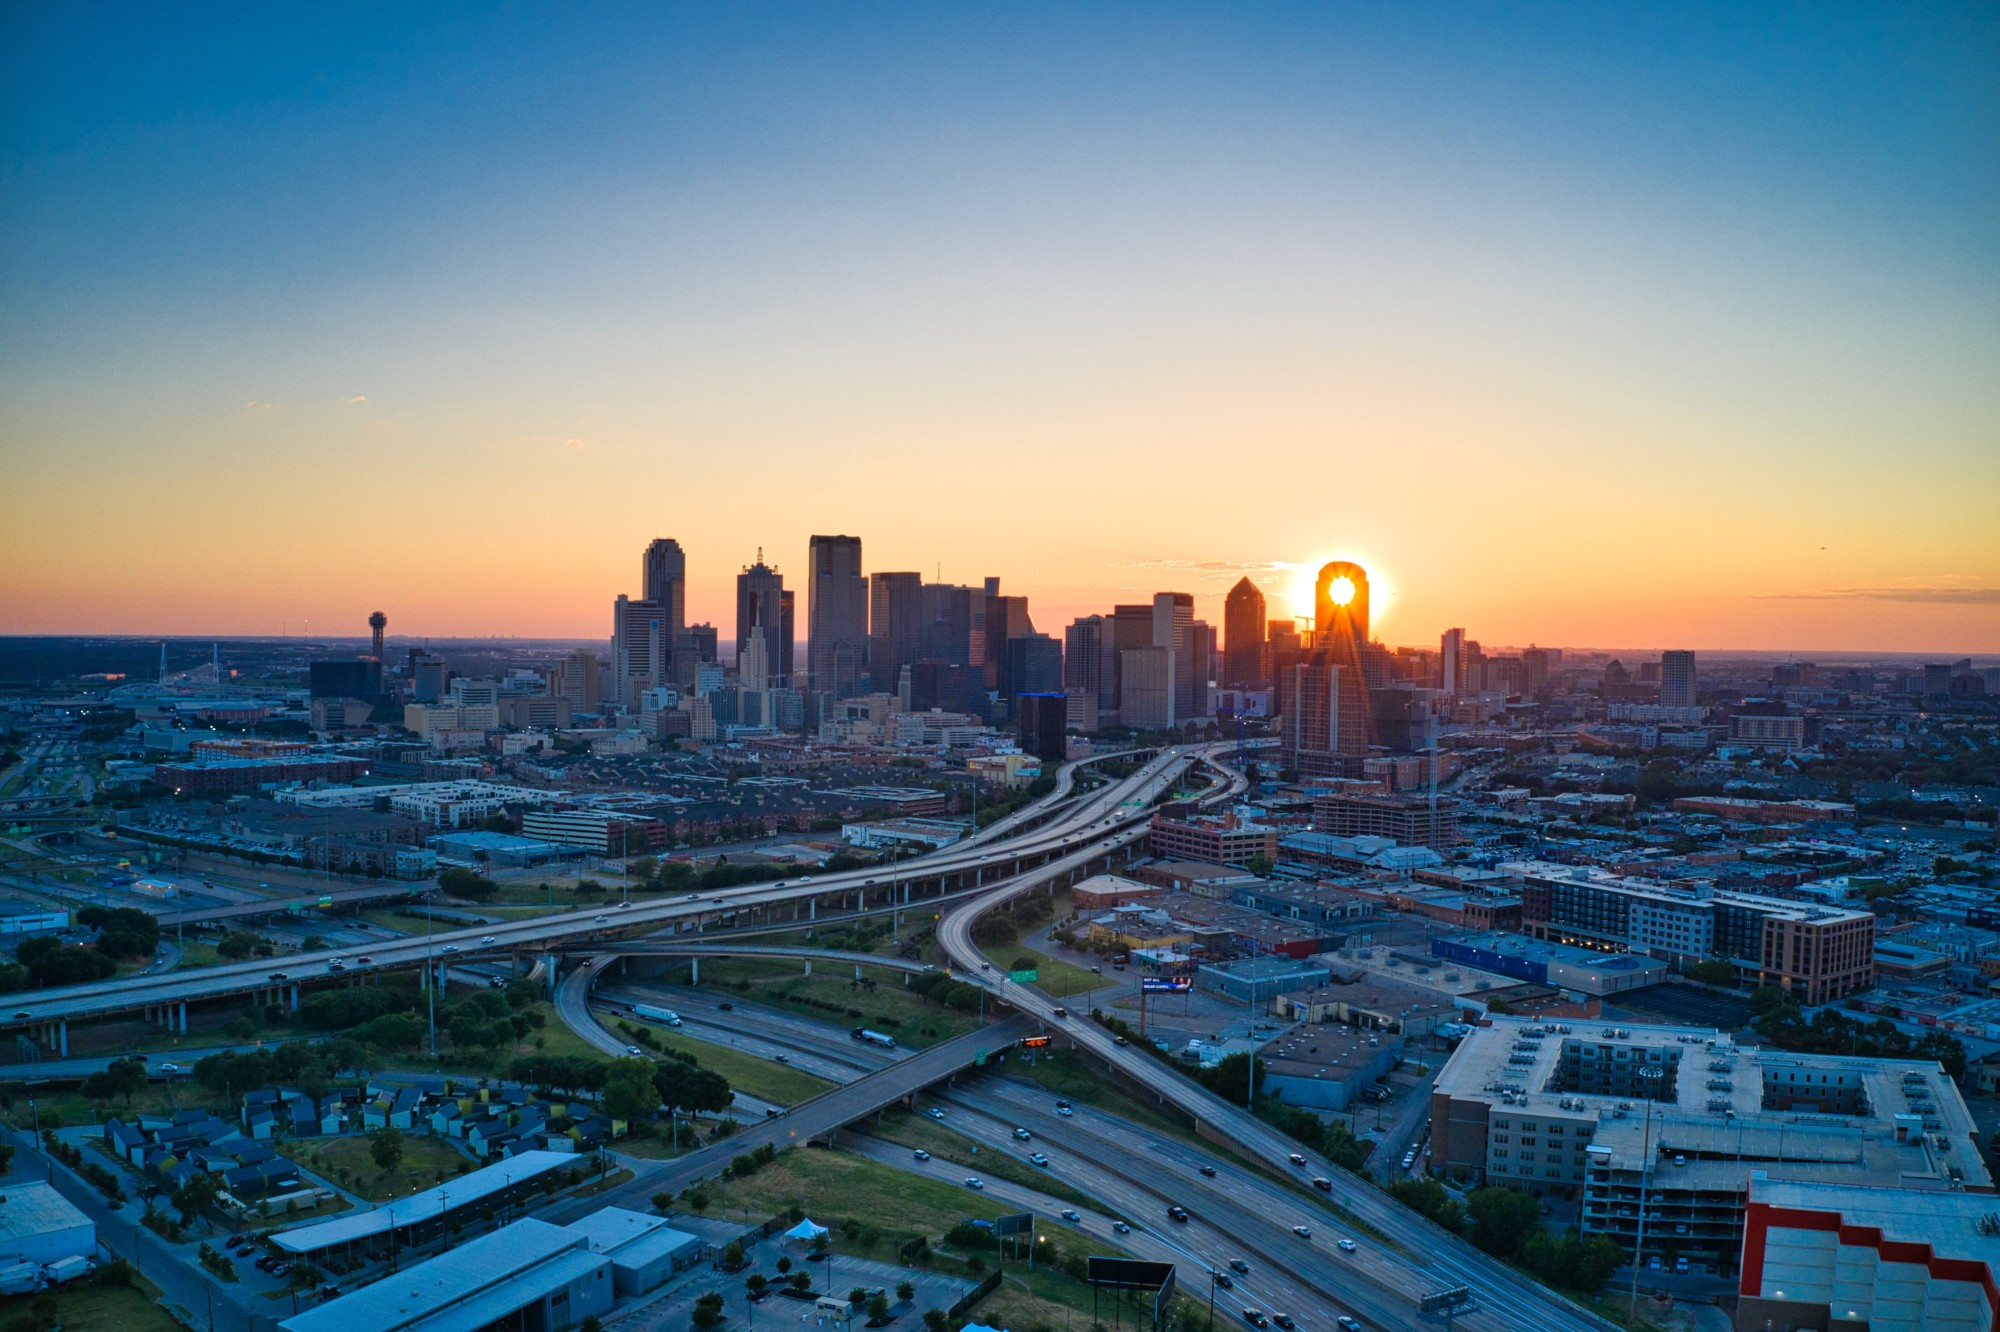 cities to visit near dallas texas